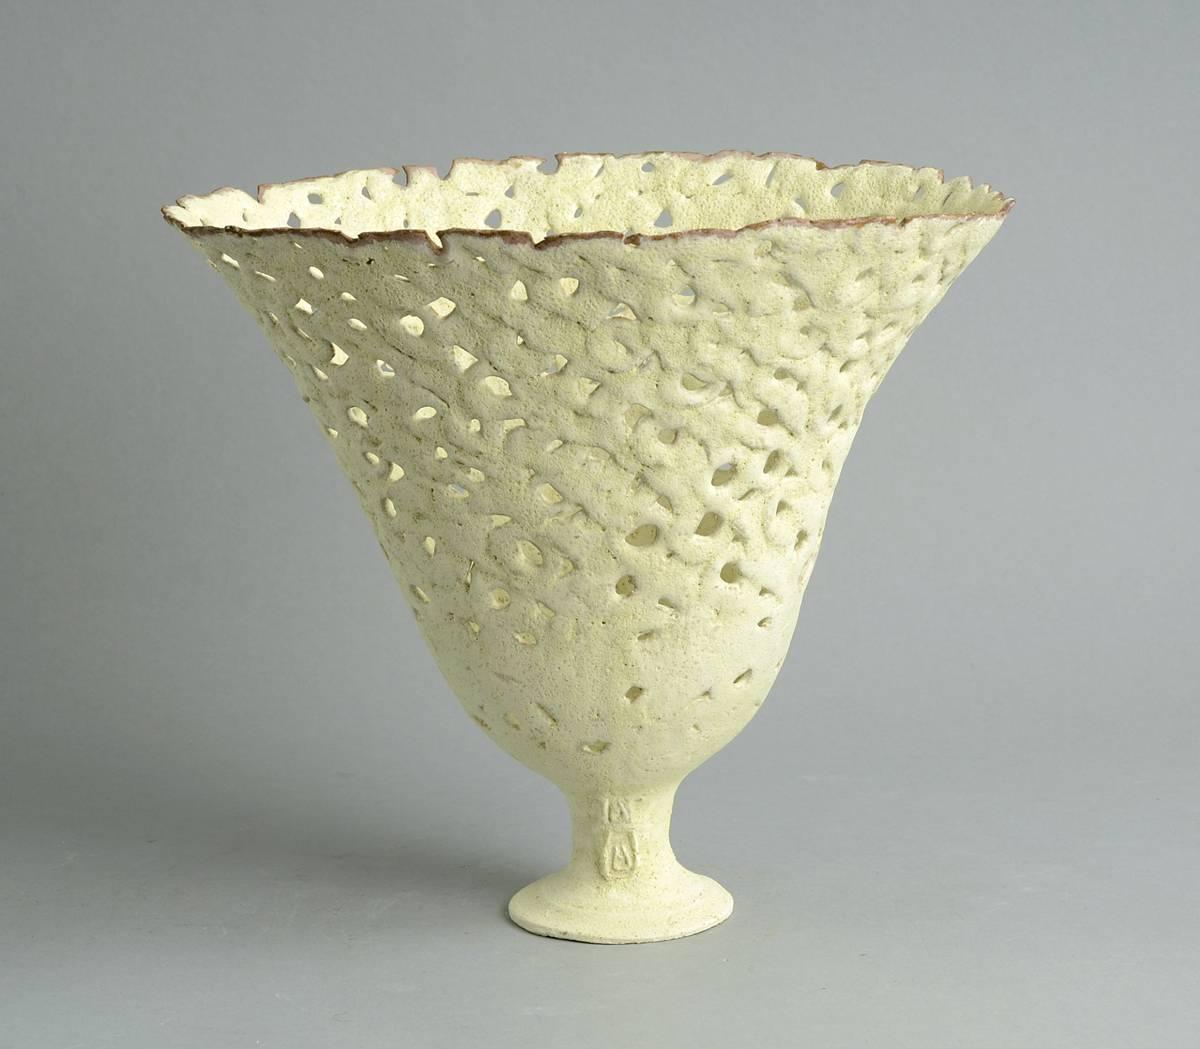 English Early Unique Stoneware Vase with matte white glaze by Ursula Morley Price